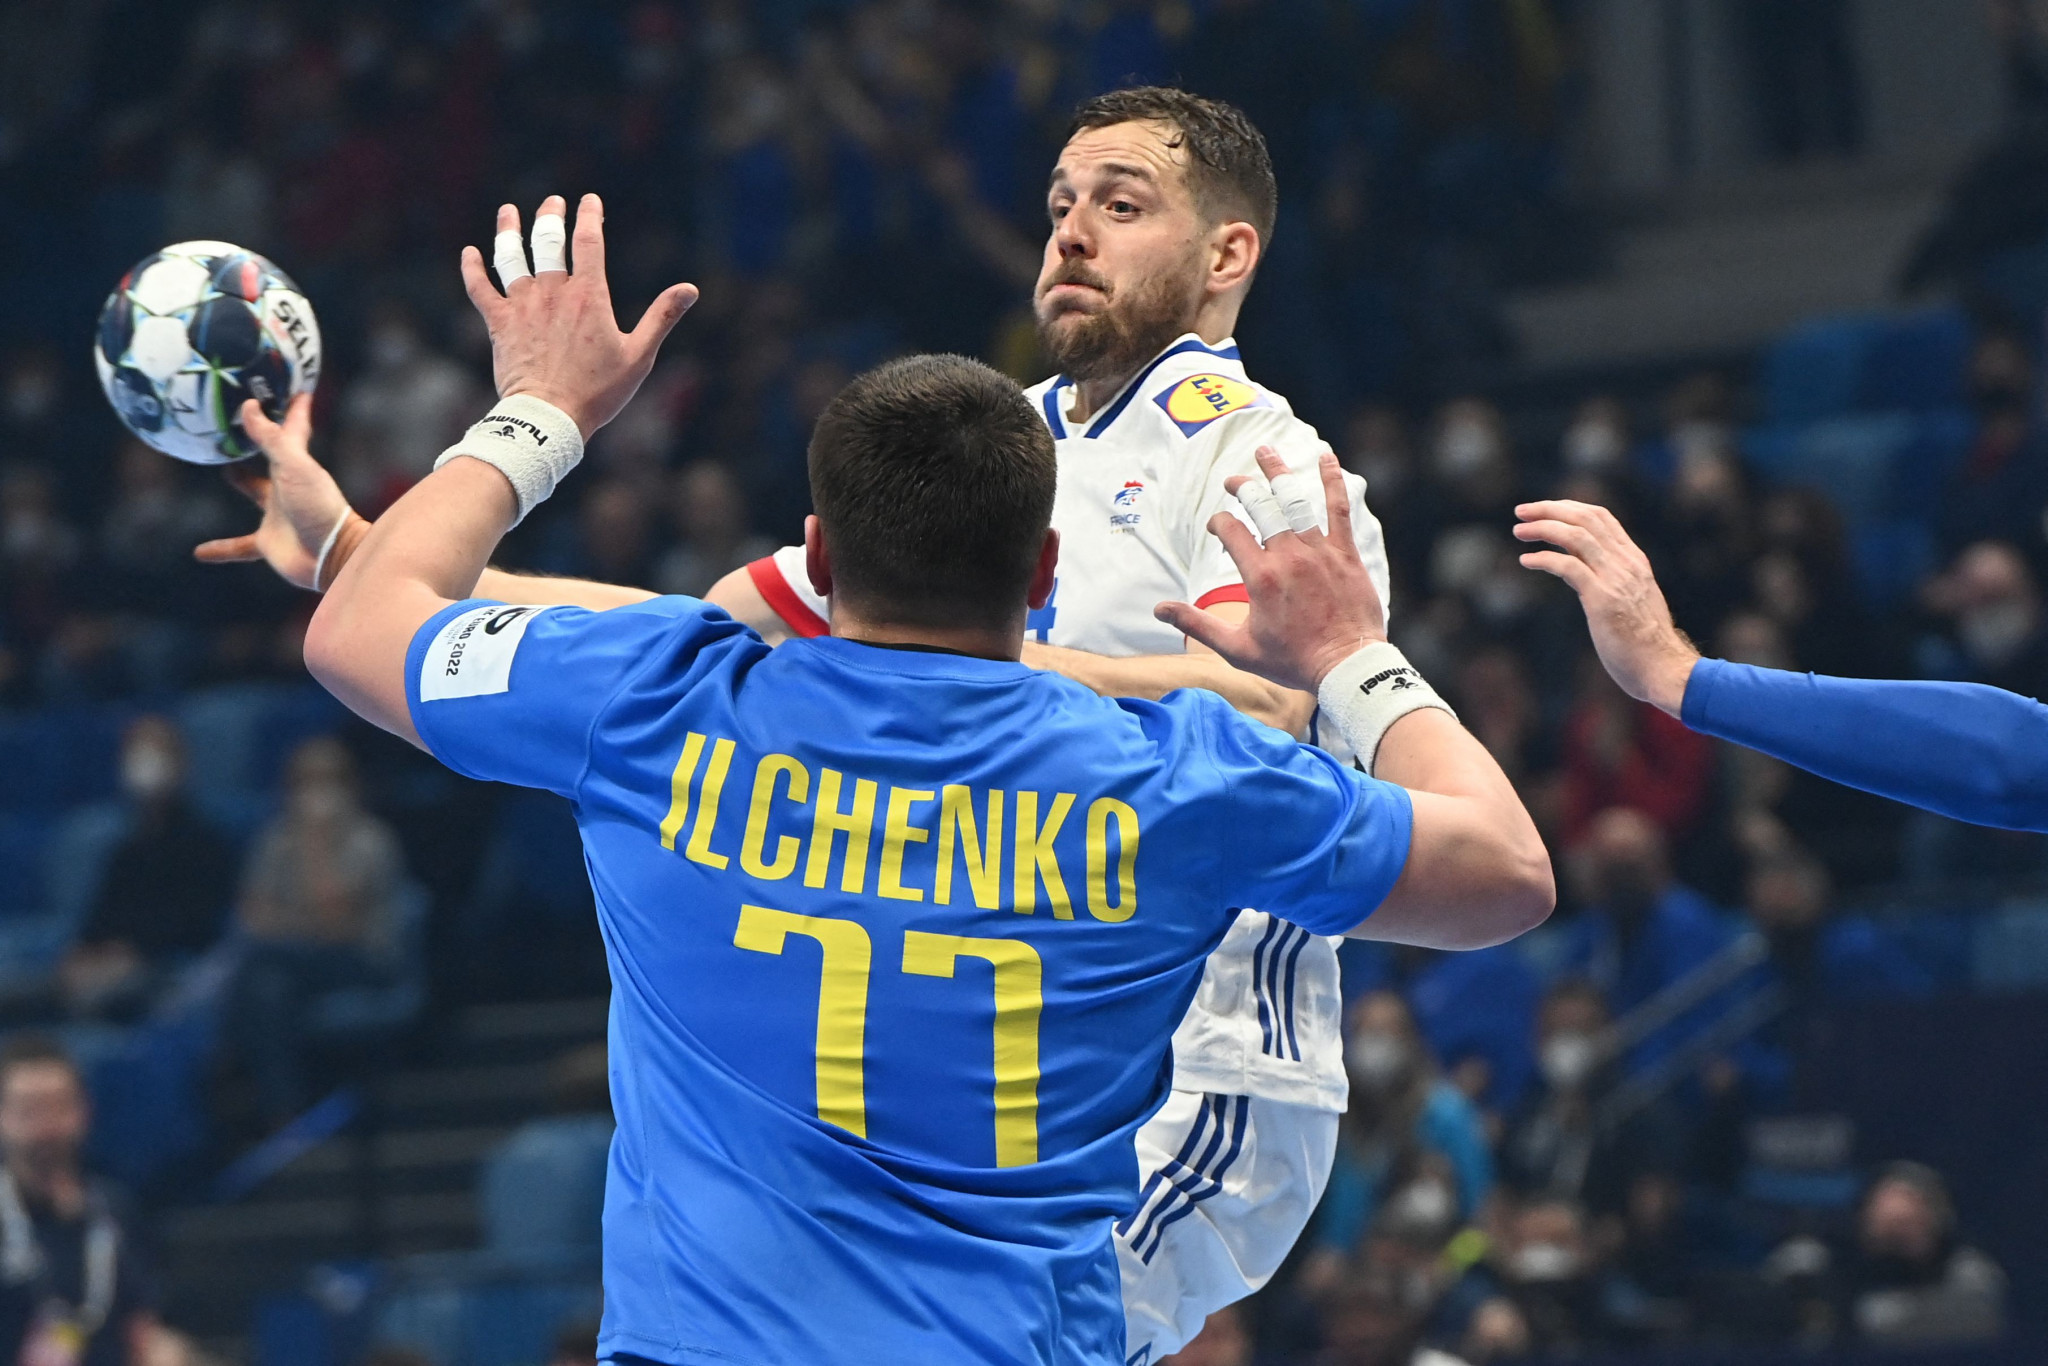 Russia-Ukraine crisis forces EHF to transfer international matches from Ukraine